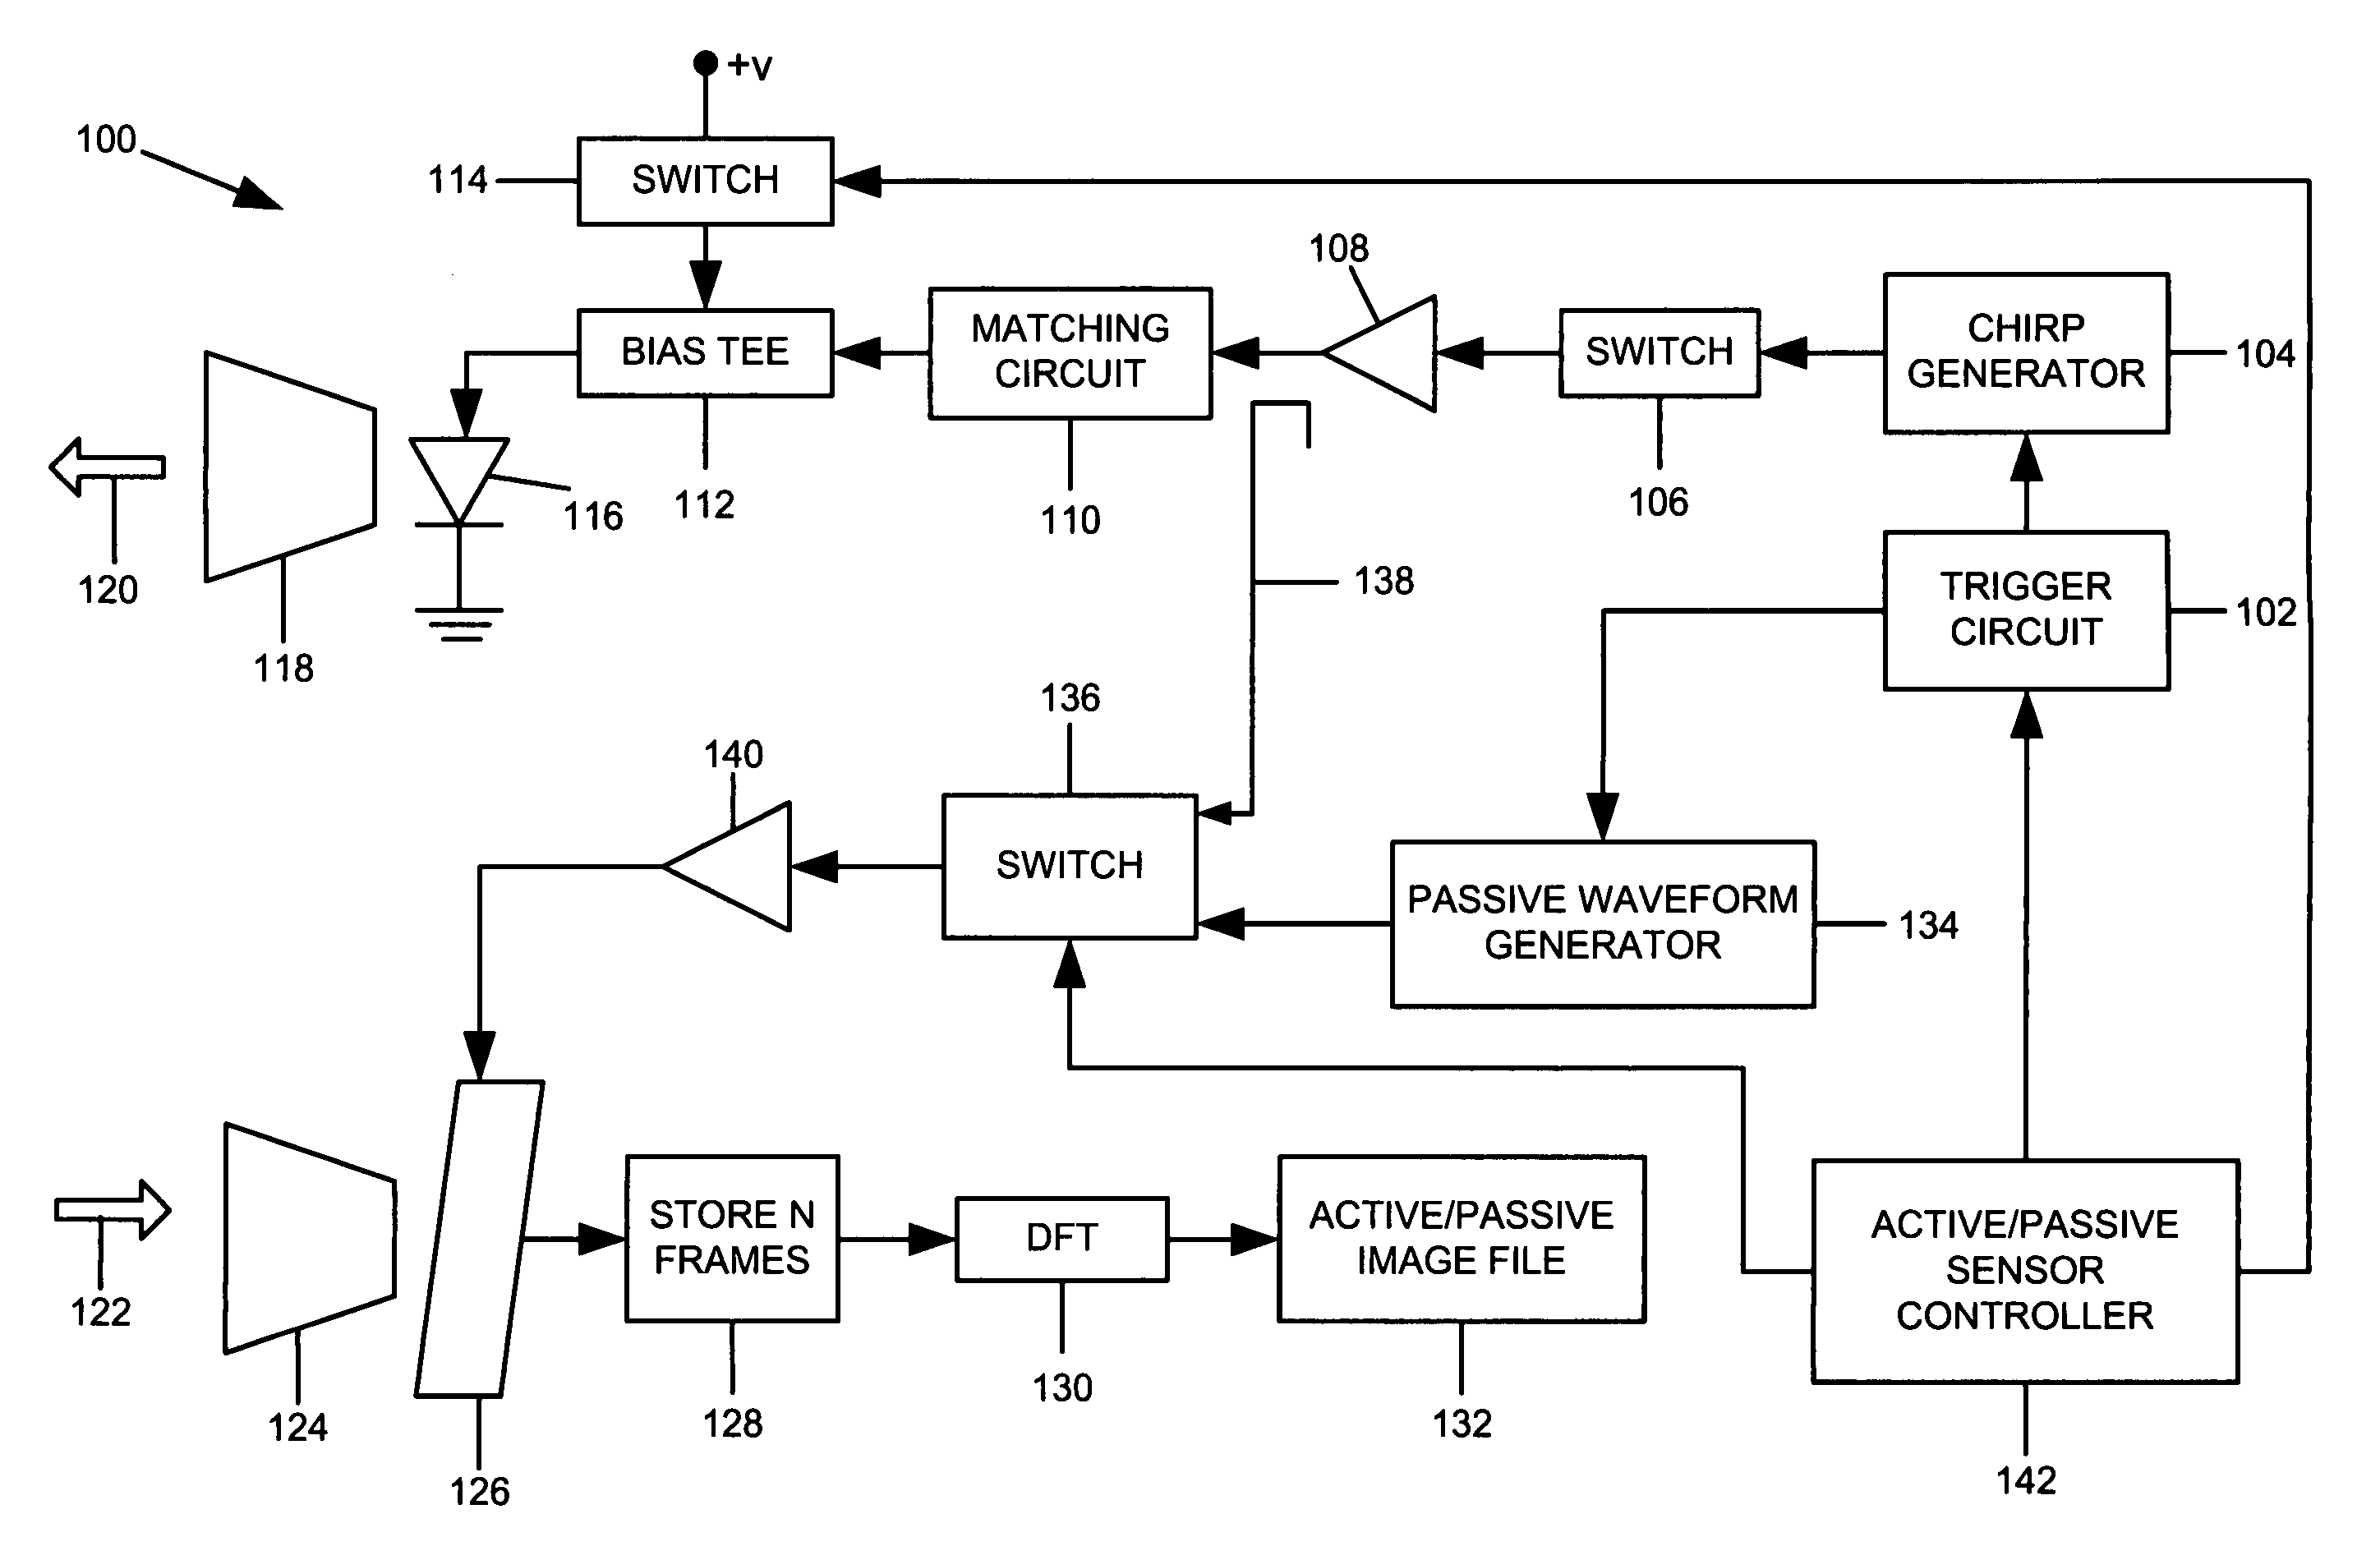 Systems and methods for performing active LADAR and passive high resolution imagery